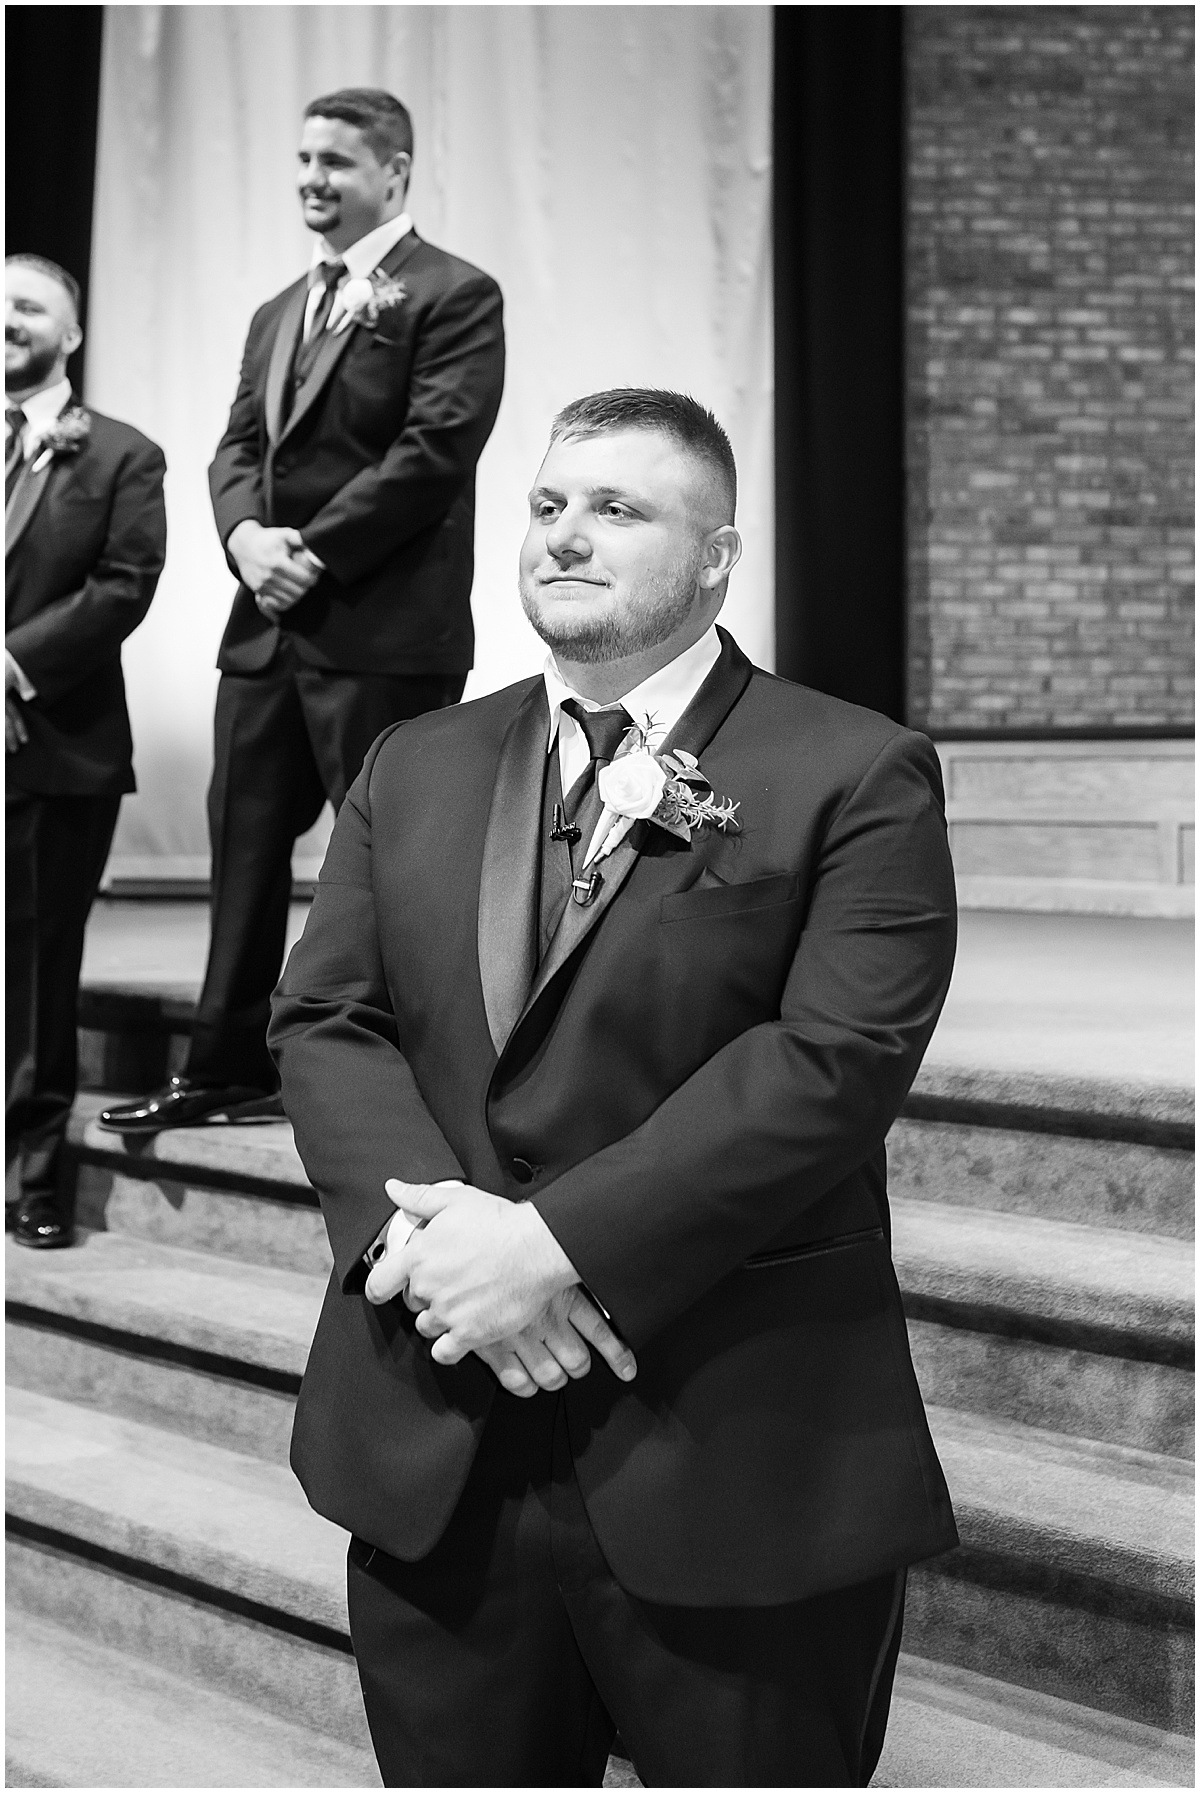 Grooms reaction to bride at wedding in at Converse Church of Christ in Converse, Indiana